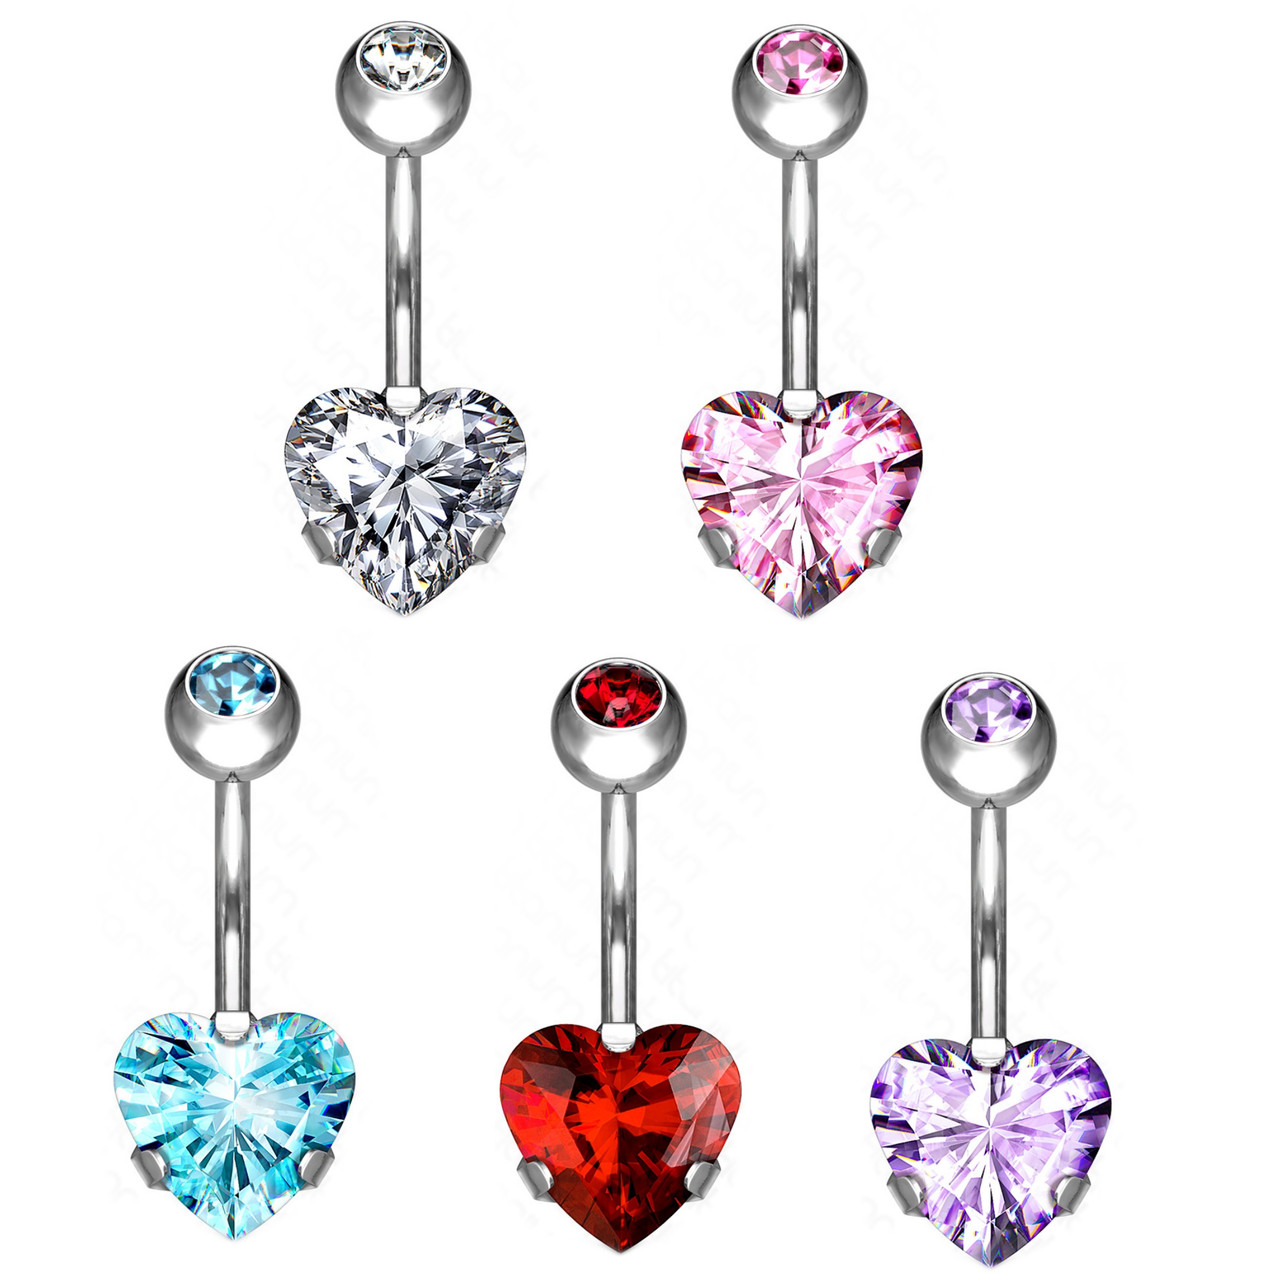 Clear 5&10 mm Surgical Steel Navel Ring Double Gemmed Solitaire Heart w/ CZ Prong Set